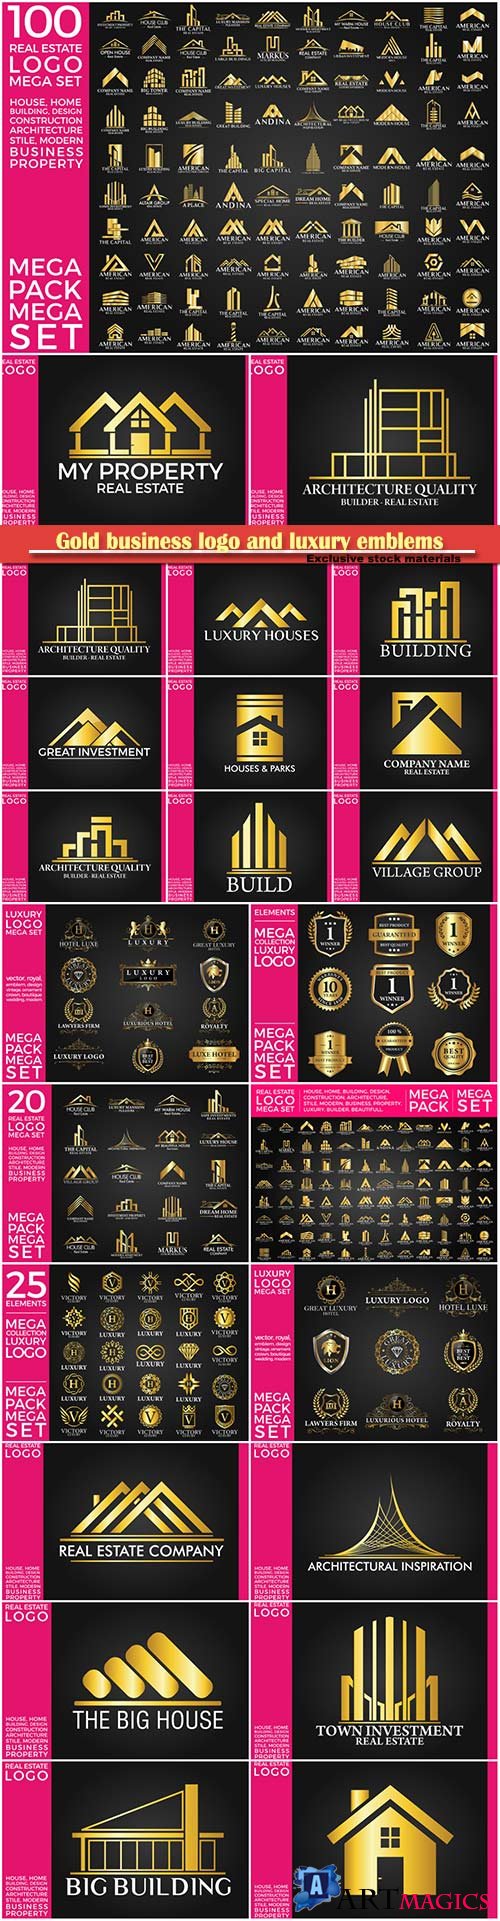 Gold business logo and luxury emblems vector illustration